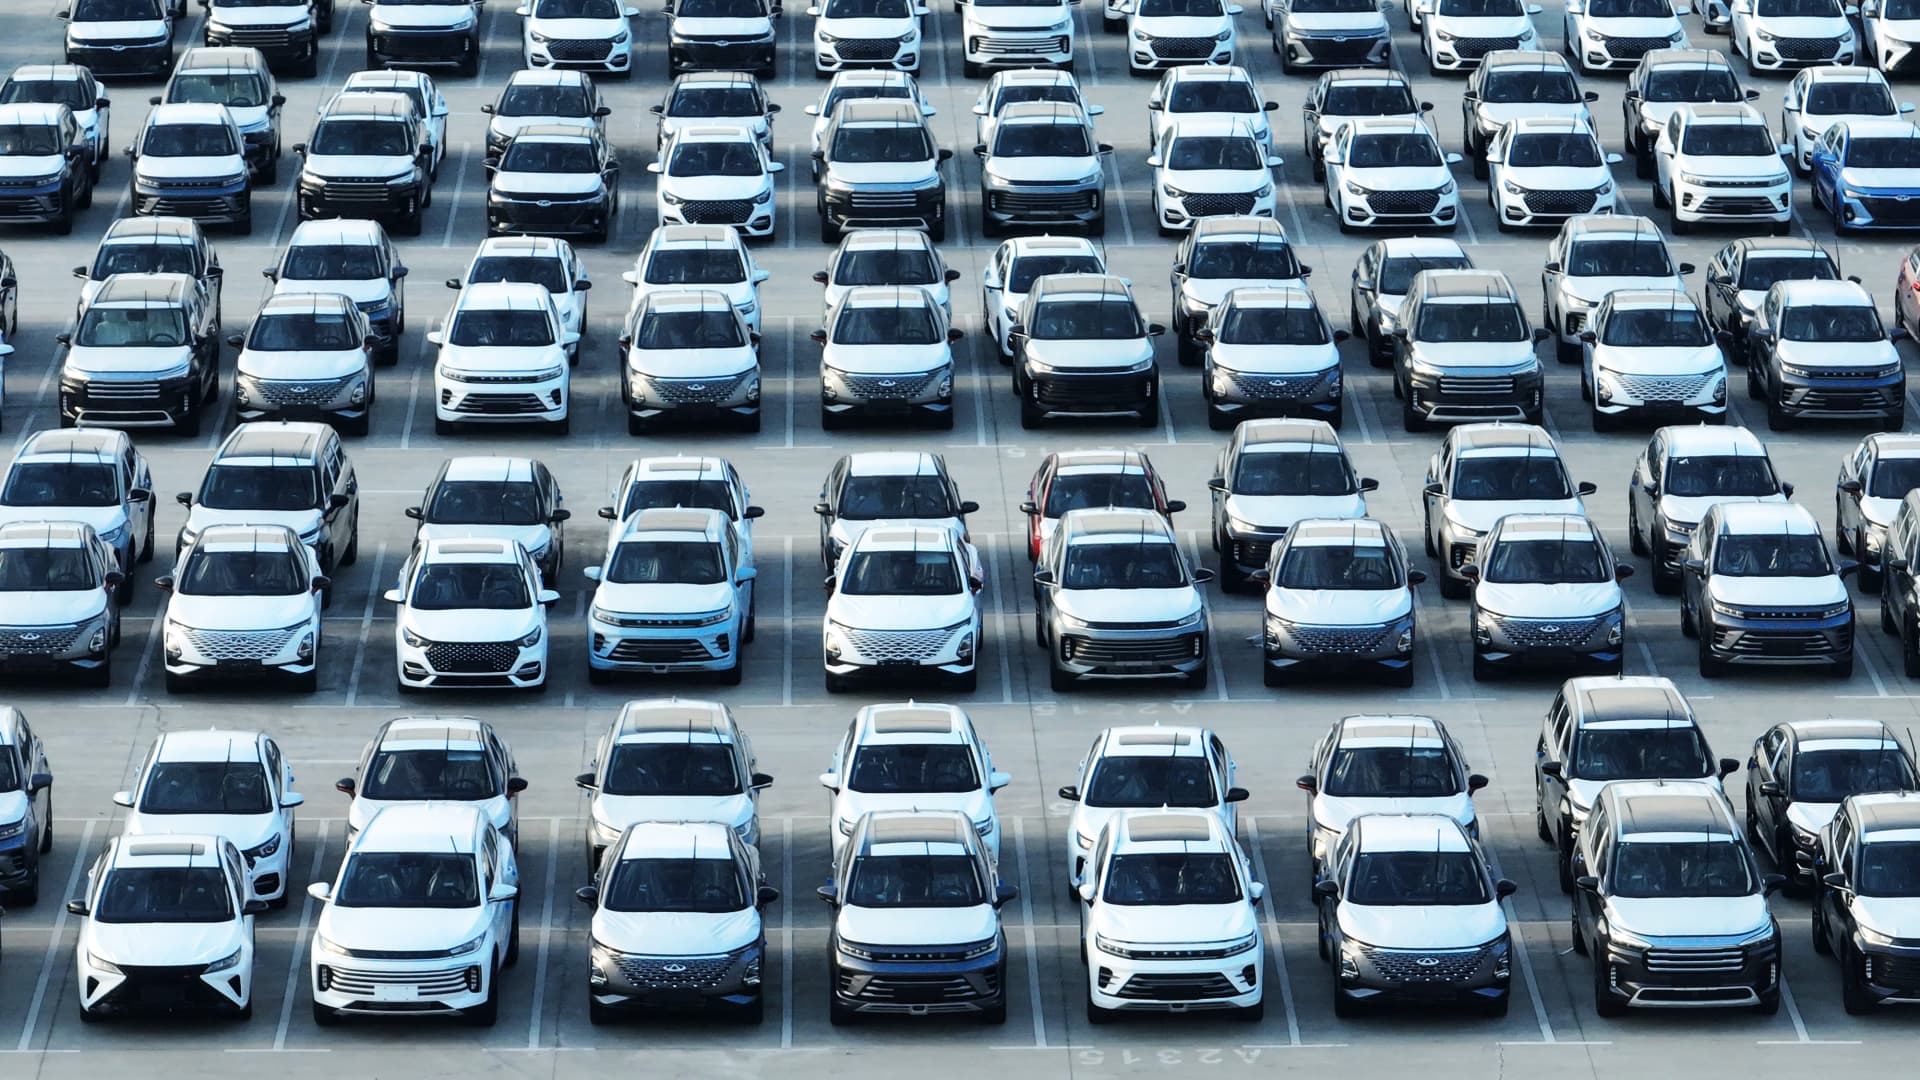 China Takes the Top Spot as the World's Leading Car Exporter